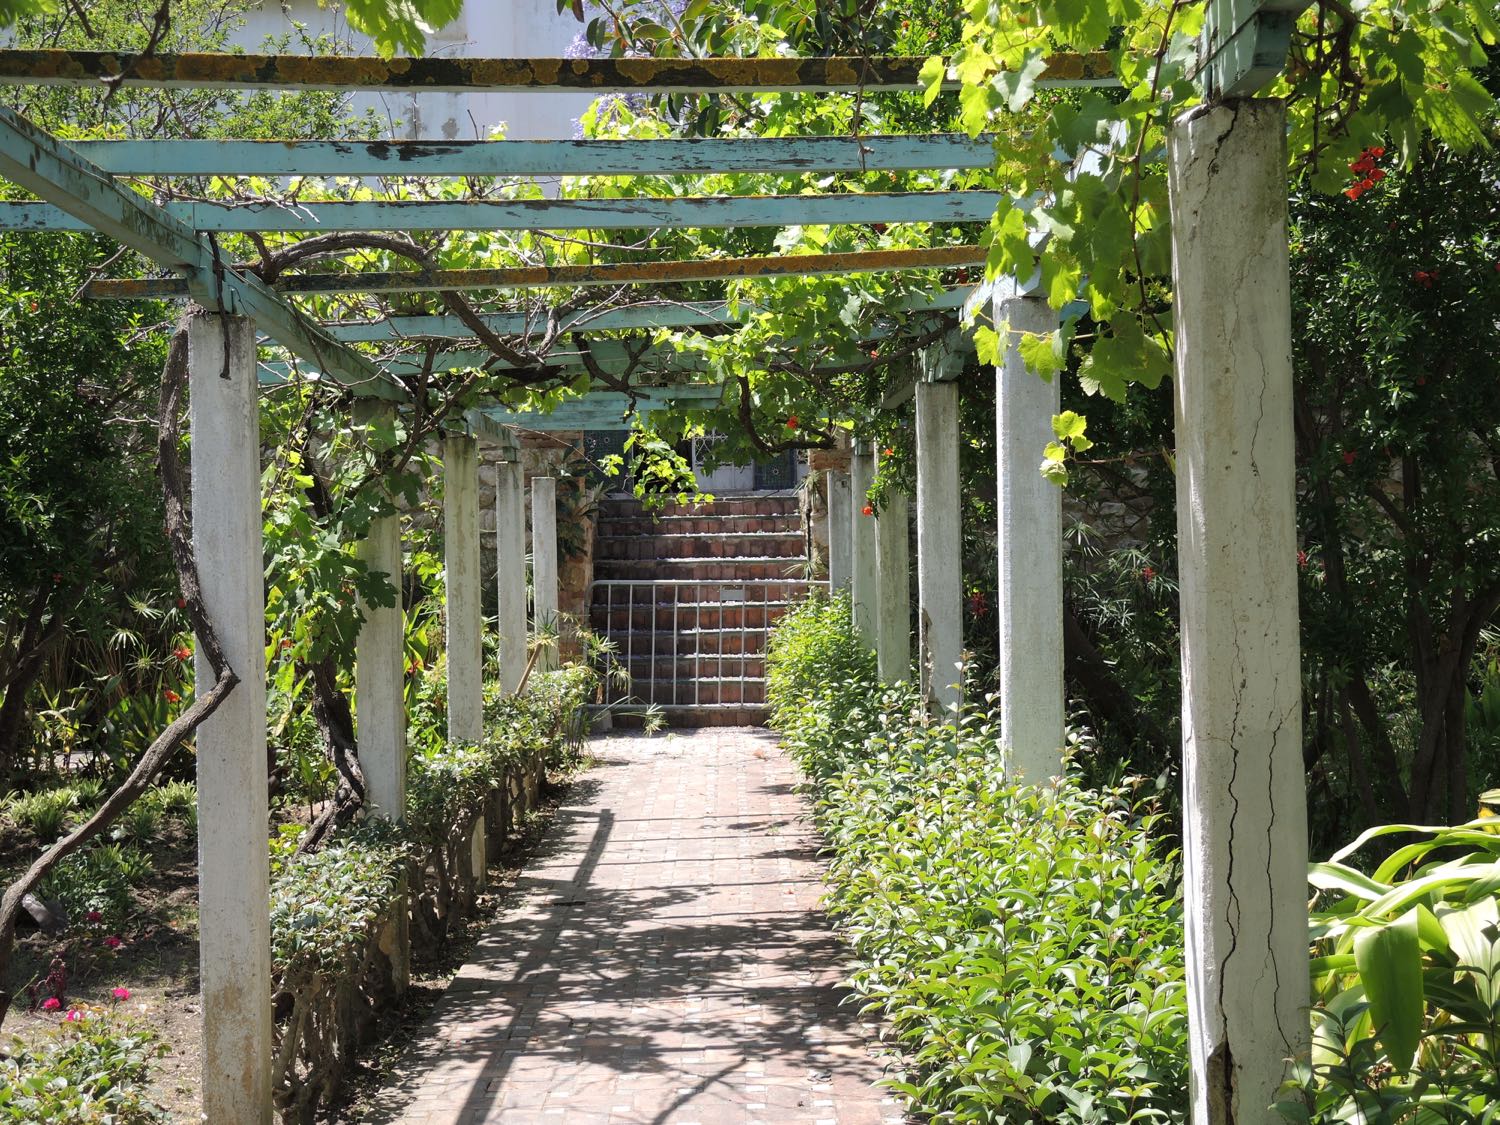  view along the trellis toward an iron gate and wall of a neighboring structure